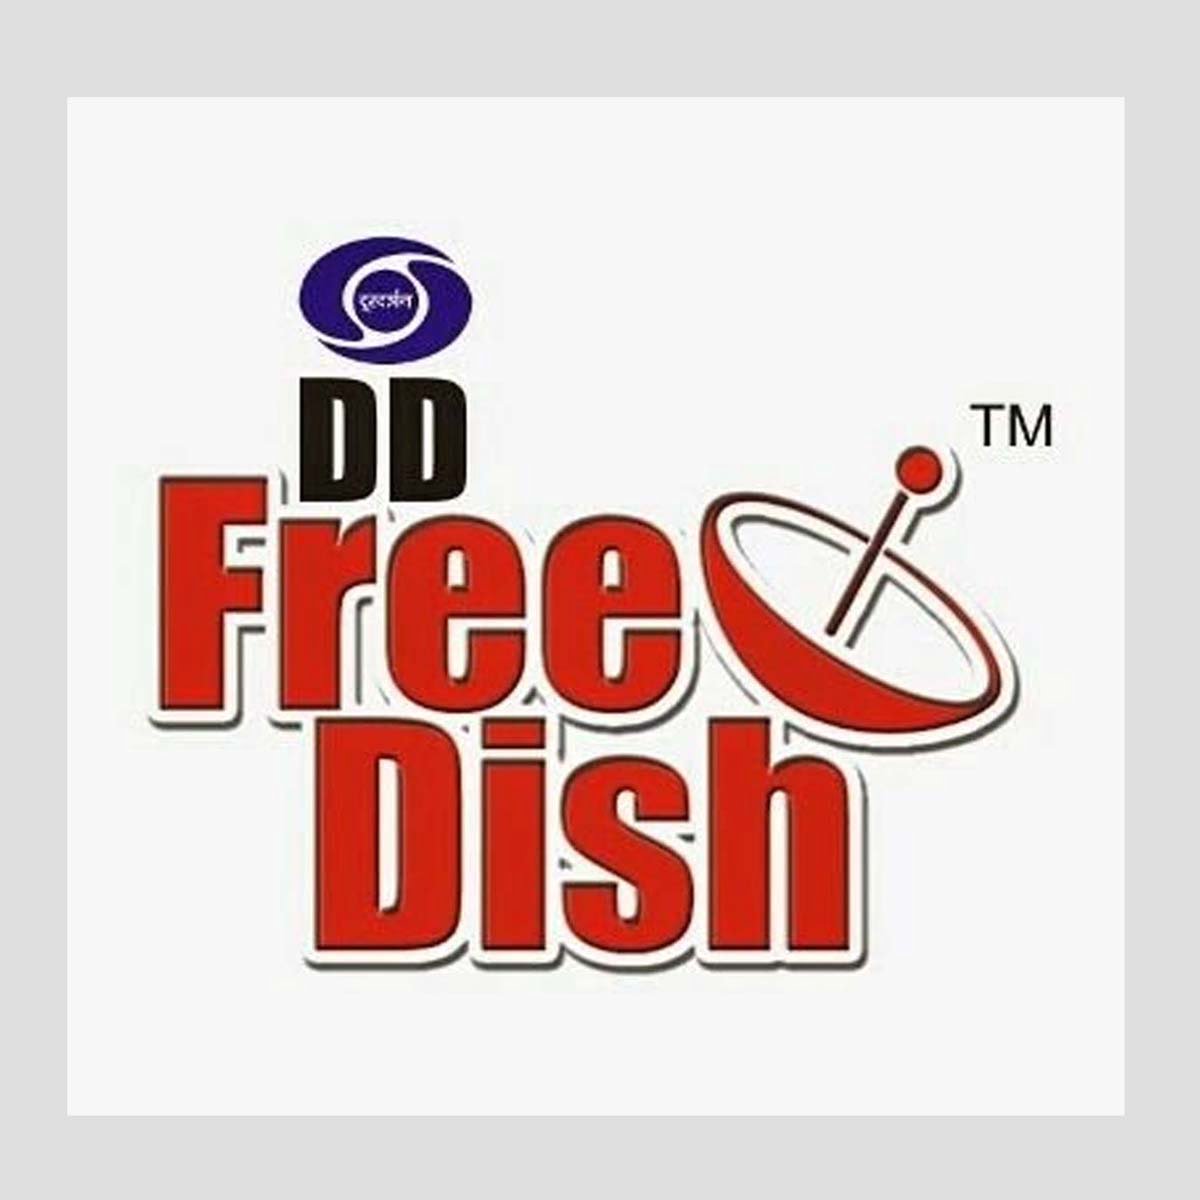 DD Free Dish now offering over 100+ FTA channels